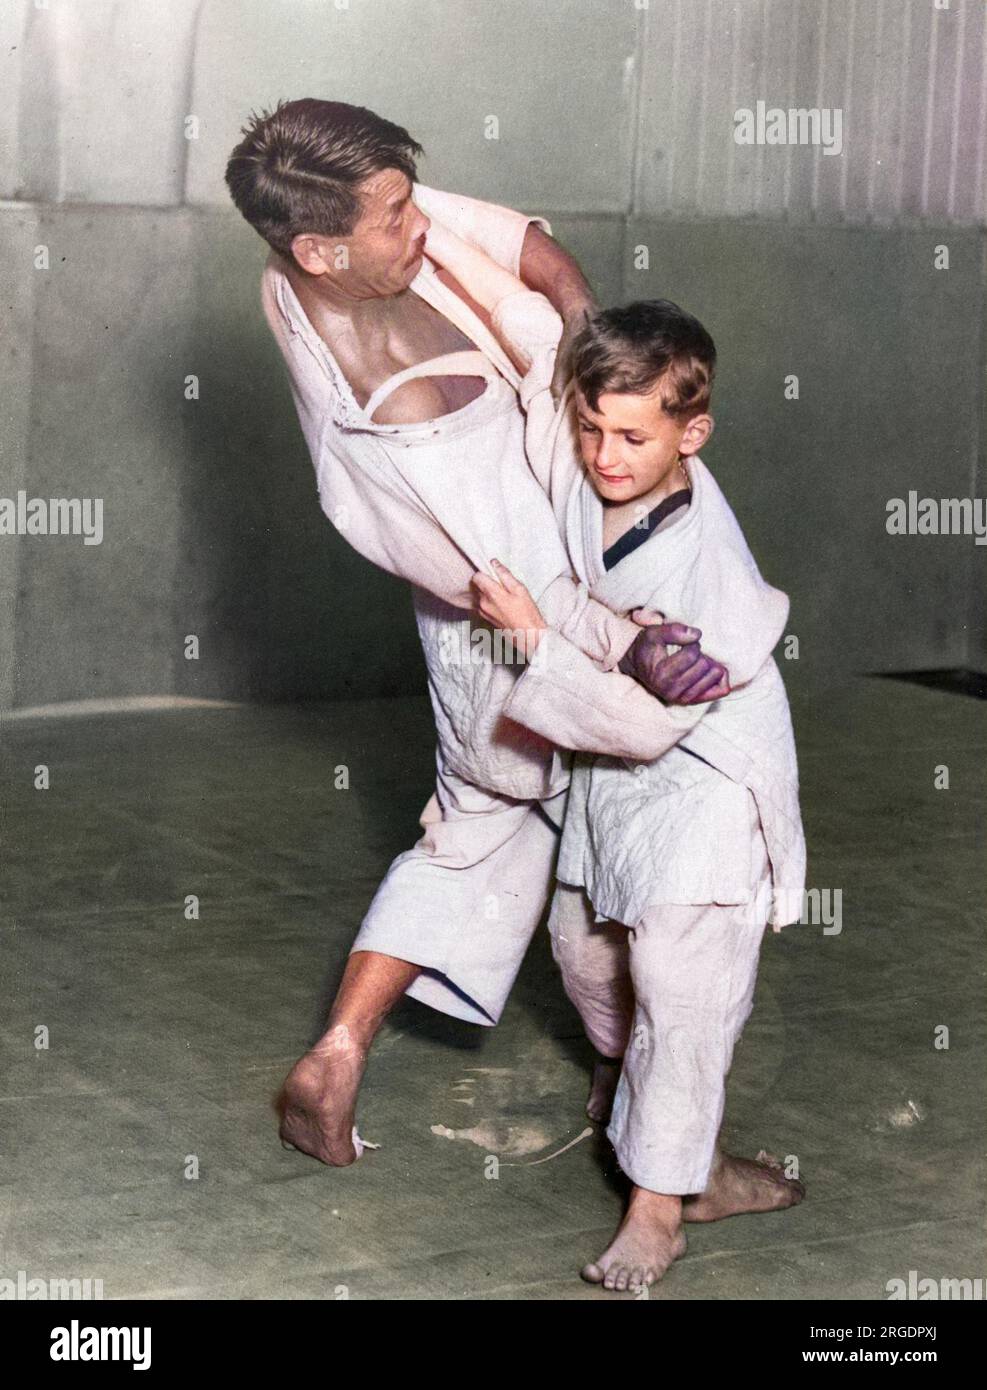 Mr. G. Koizumi, the Japanese expert, giving a JUJITSU lesson to young Master Andrew Eills! Stock Photo